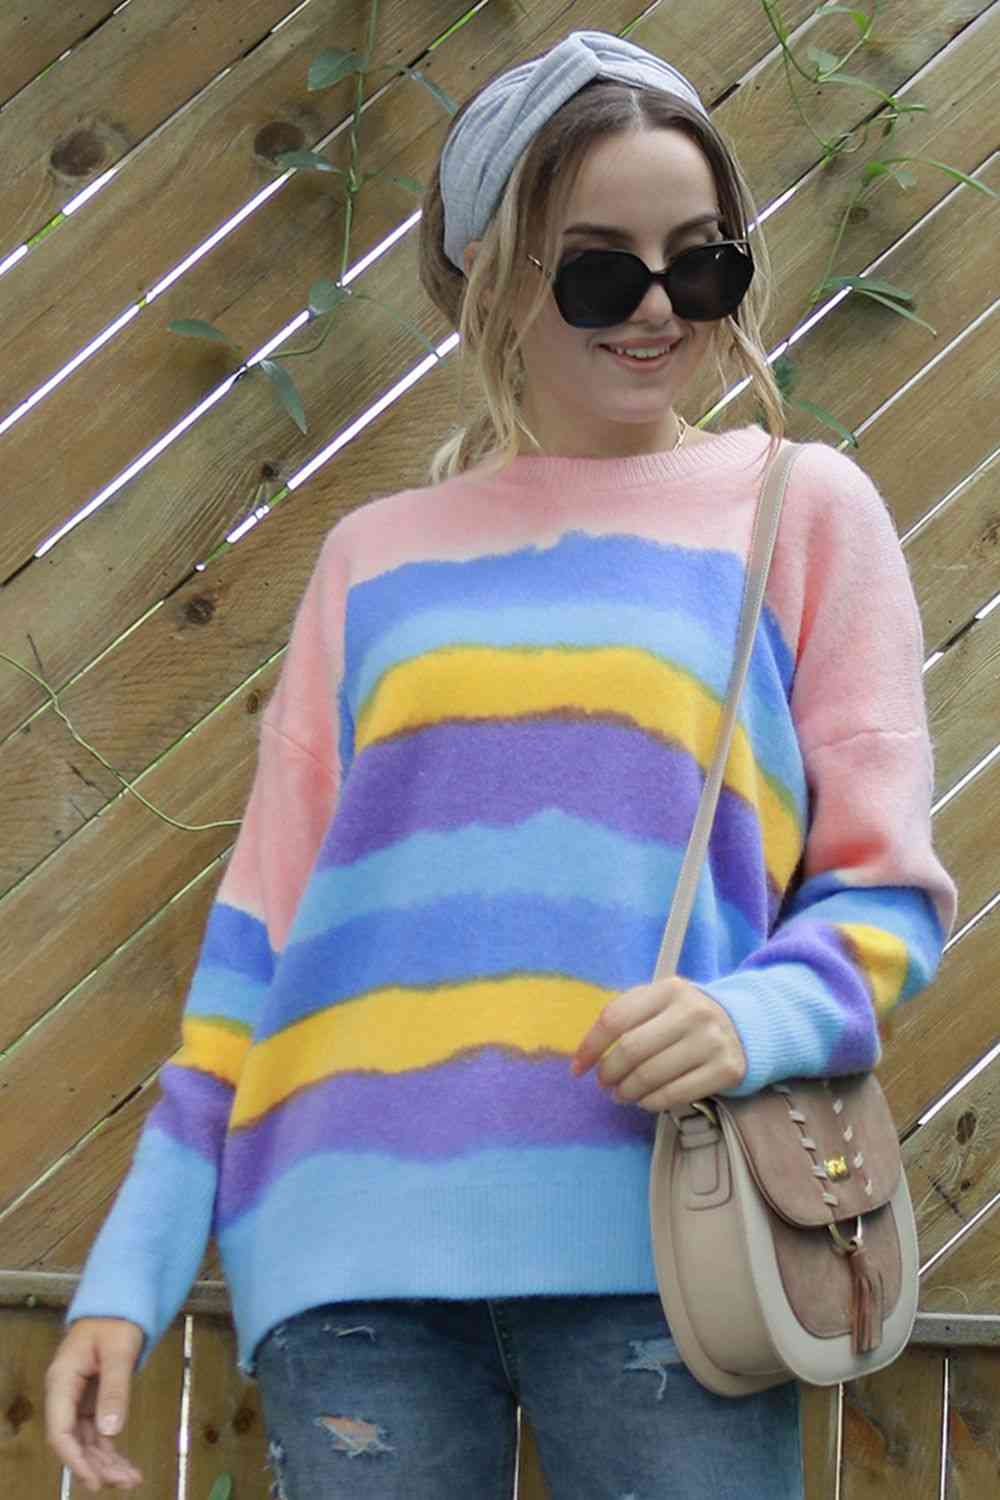 Multicolor Round Neck Dropped Shoulder Sweater